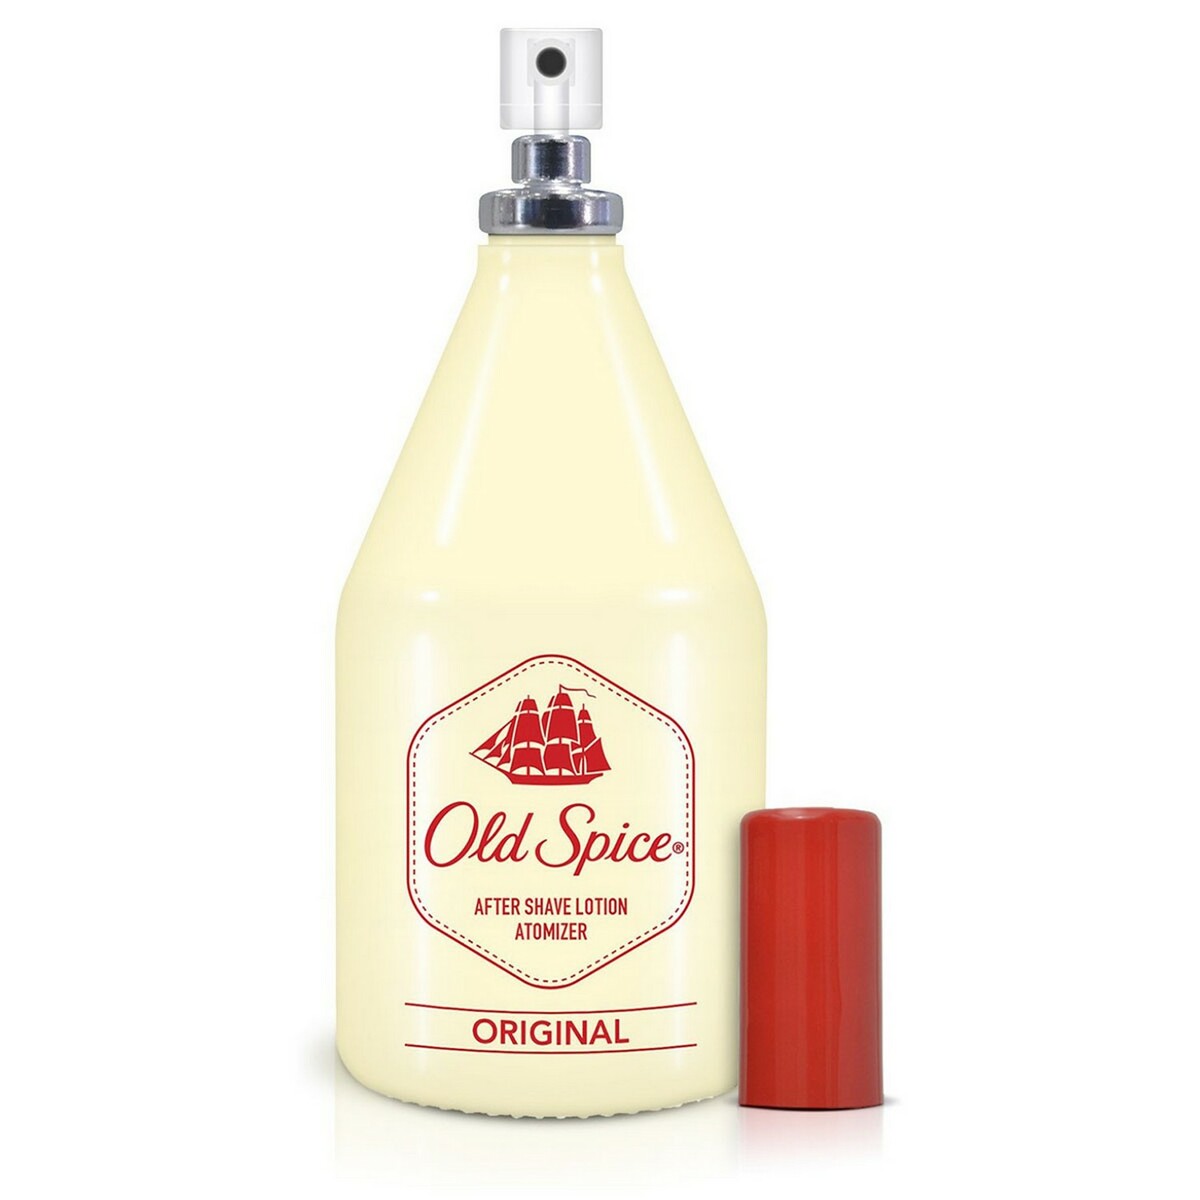 Old Spice After Shave Lotion Atomizer Original 150ml